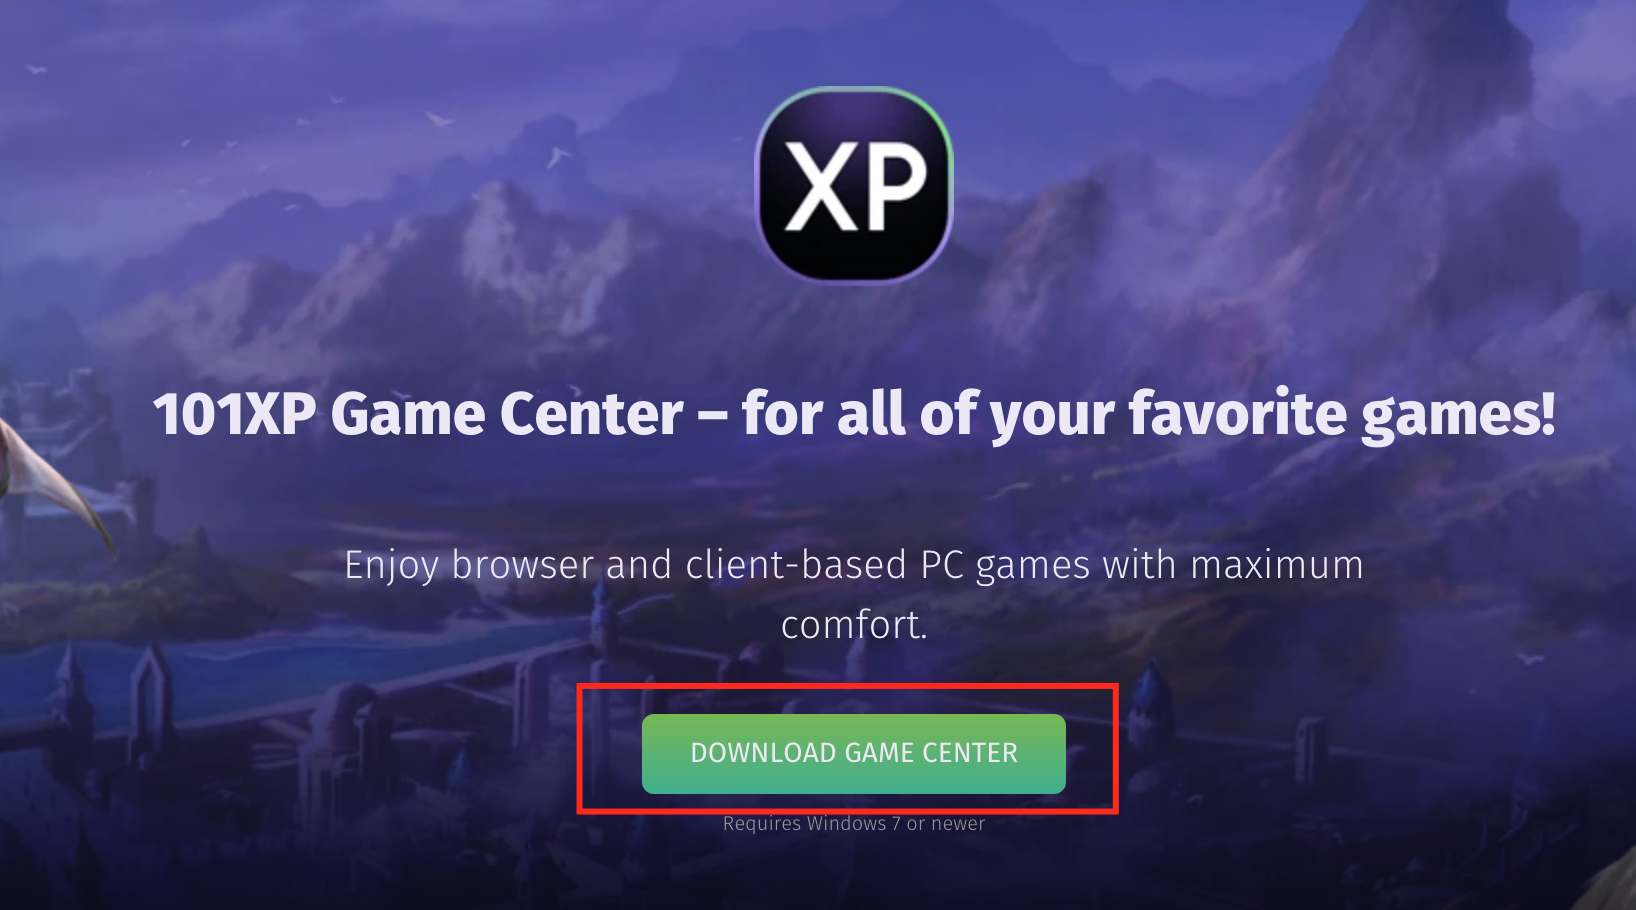 Enjoy browser-based and client-based PC games